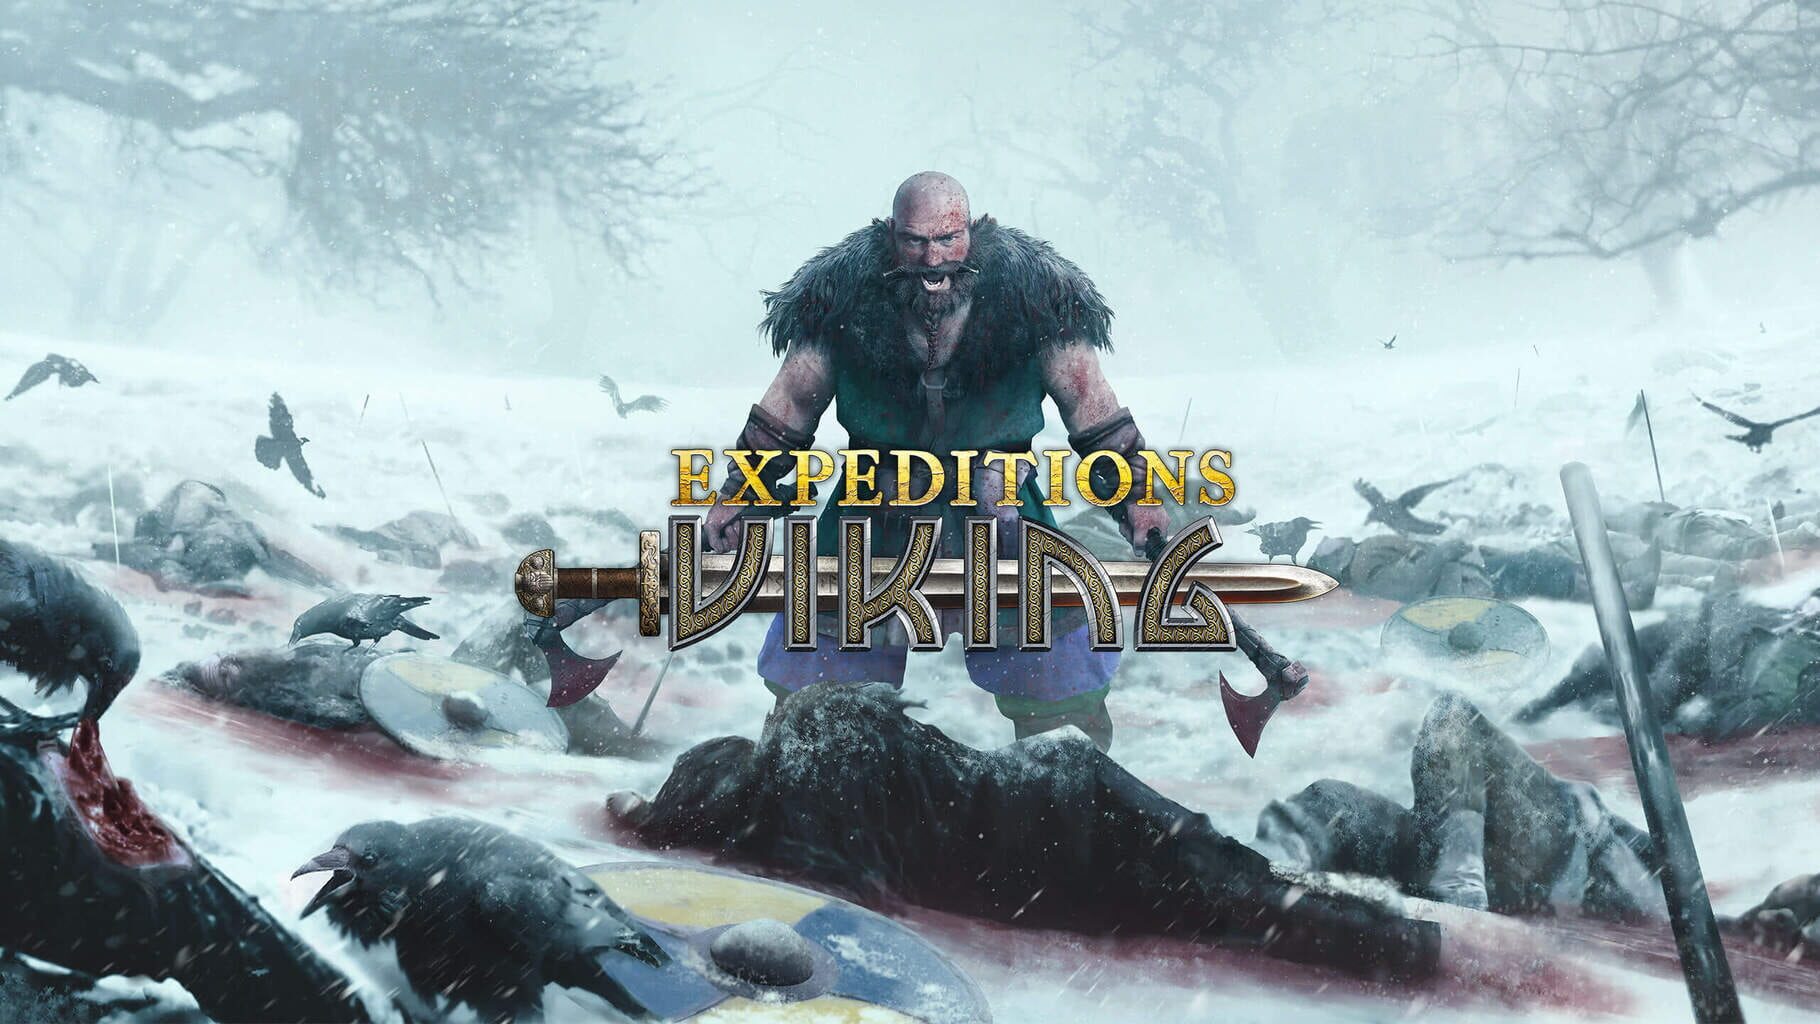 Artwork for Expeditions: Viking